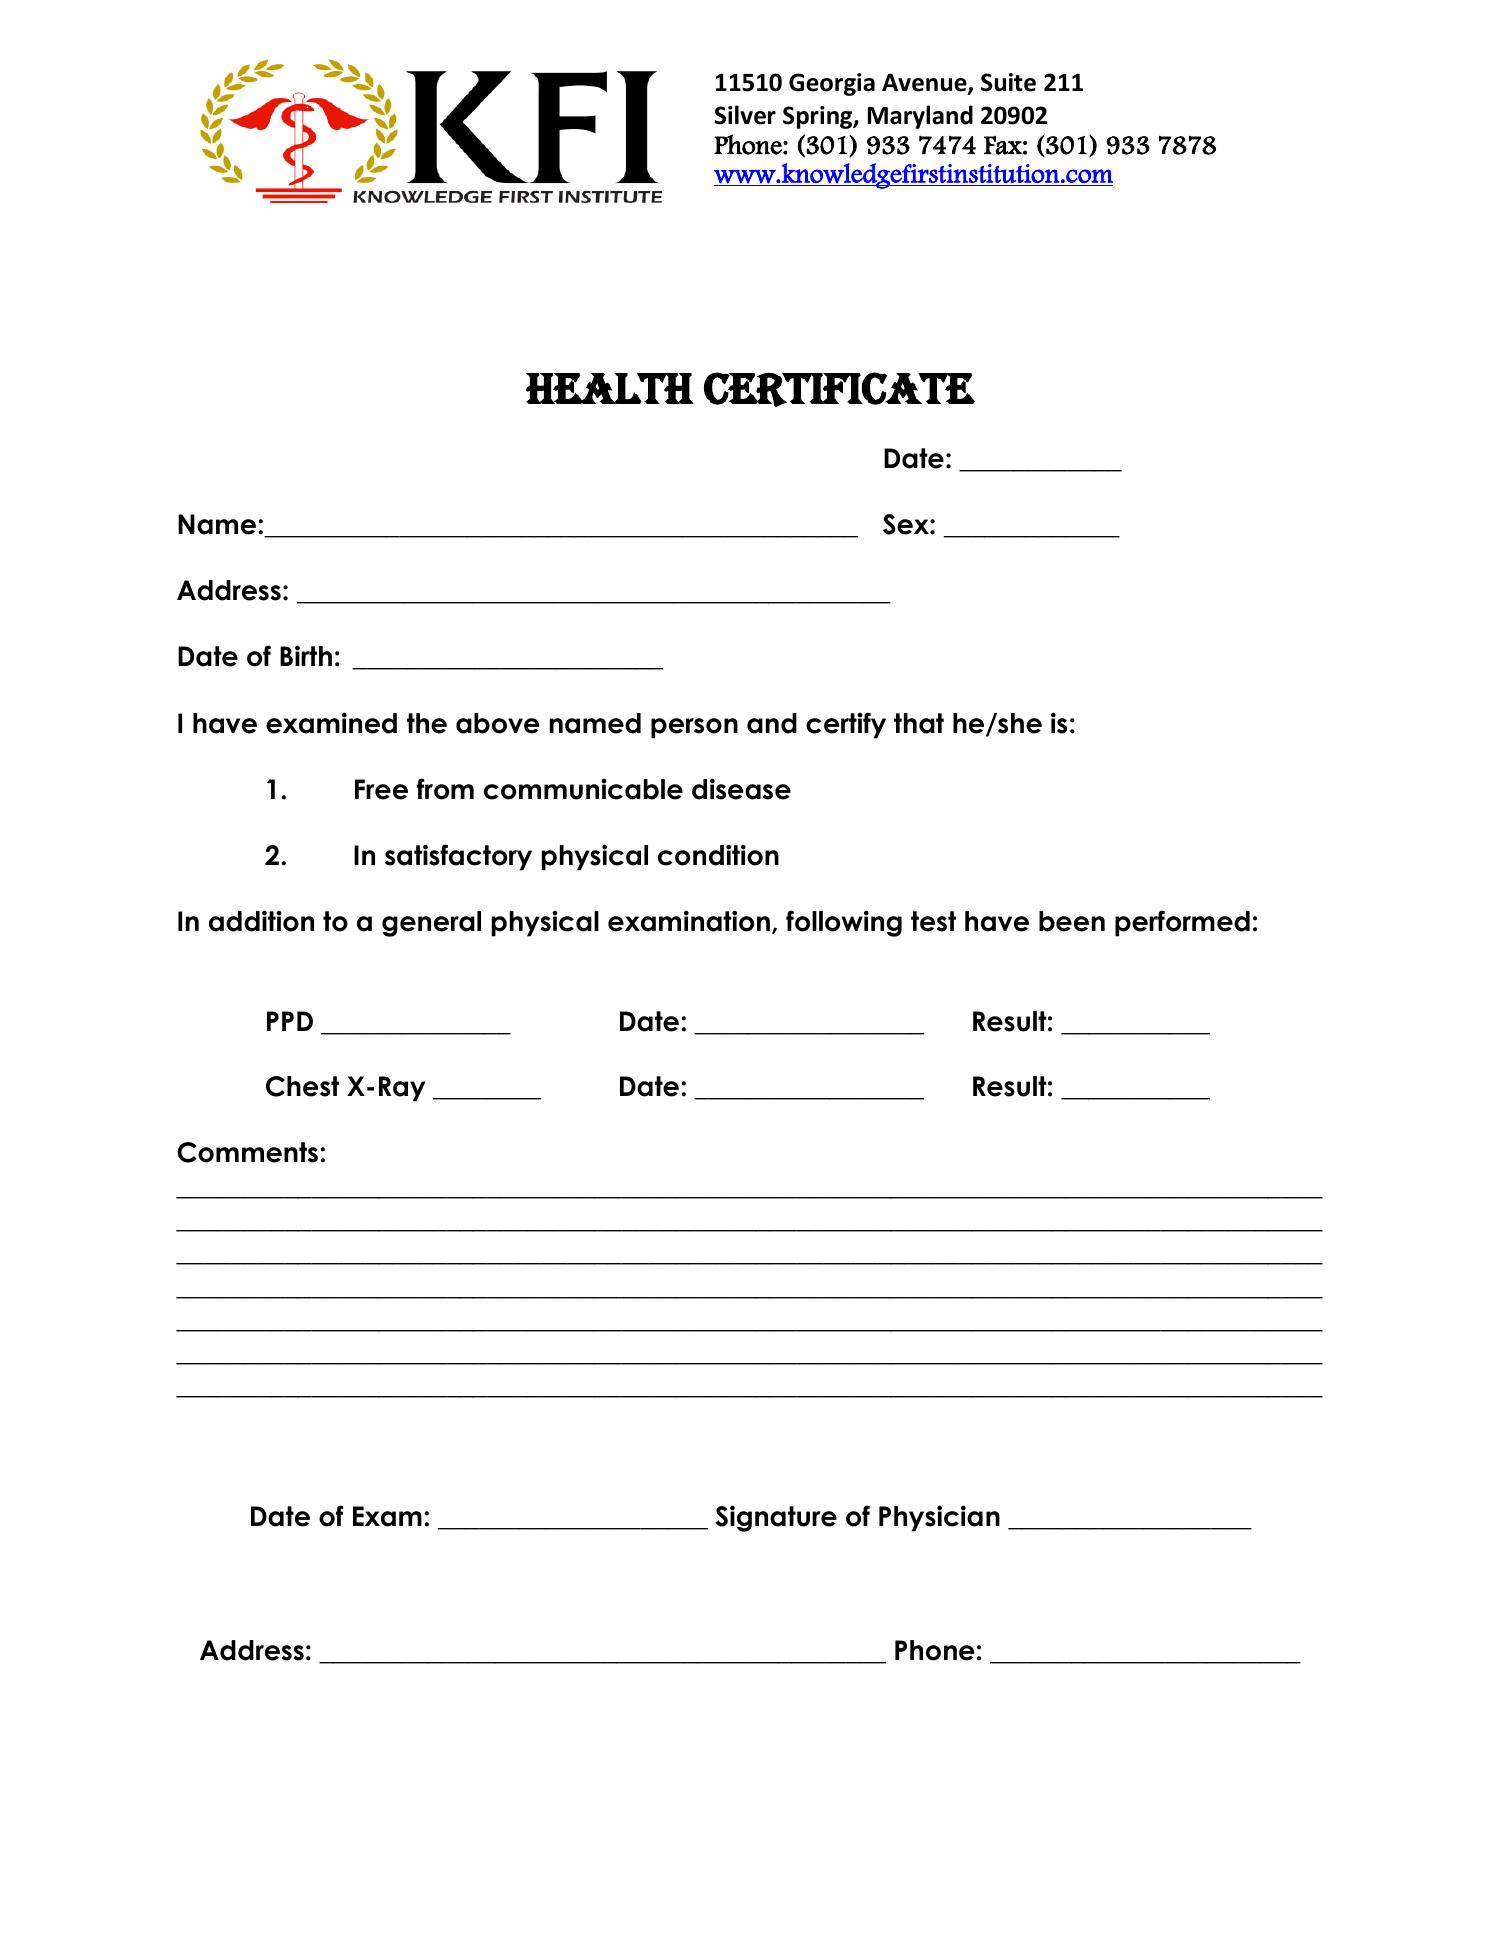 health-certificate-form-pdf-docdroid